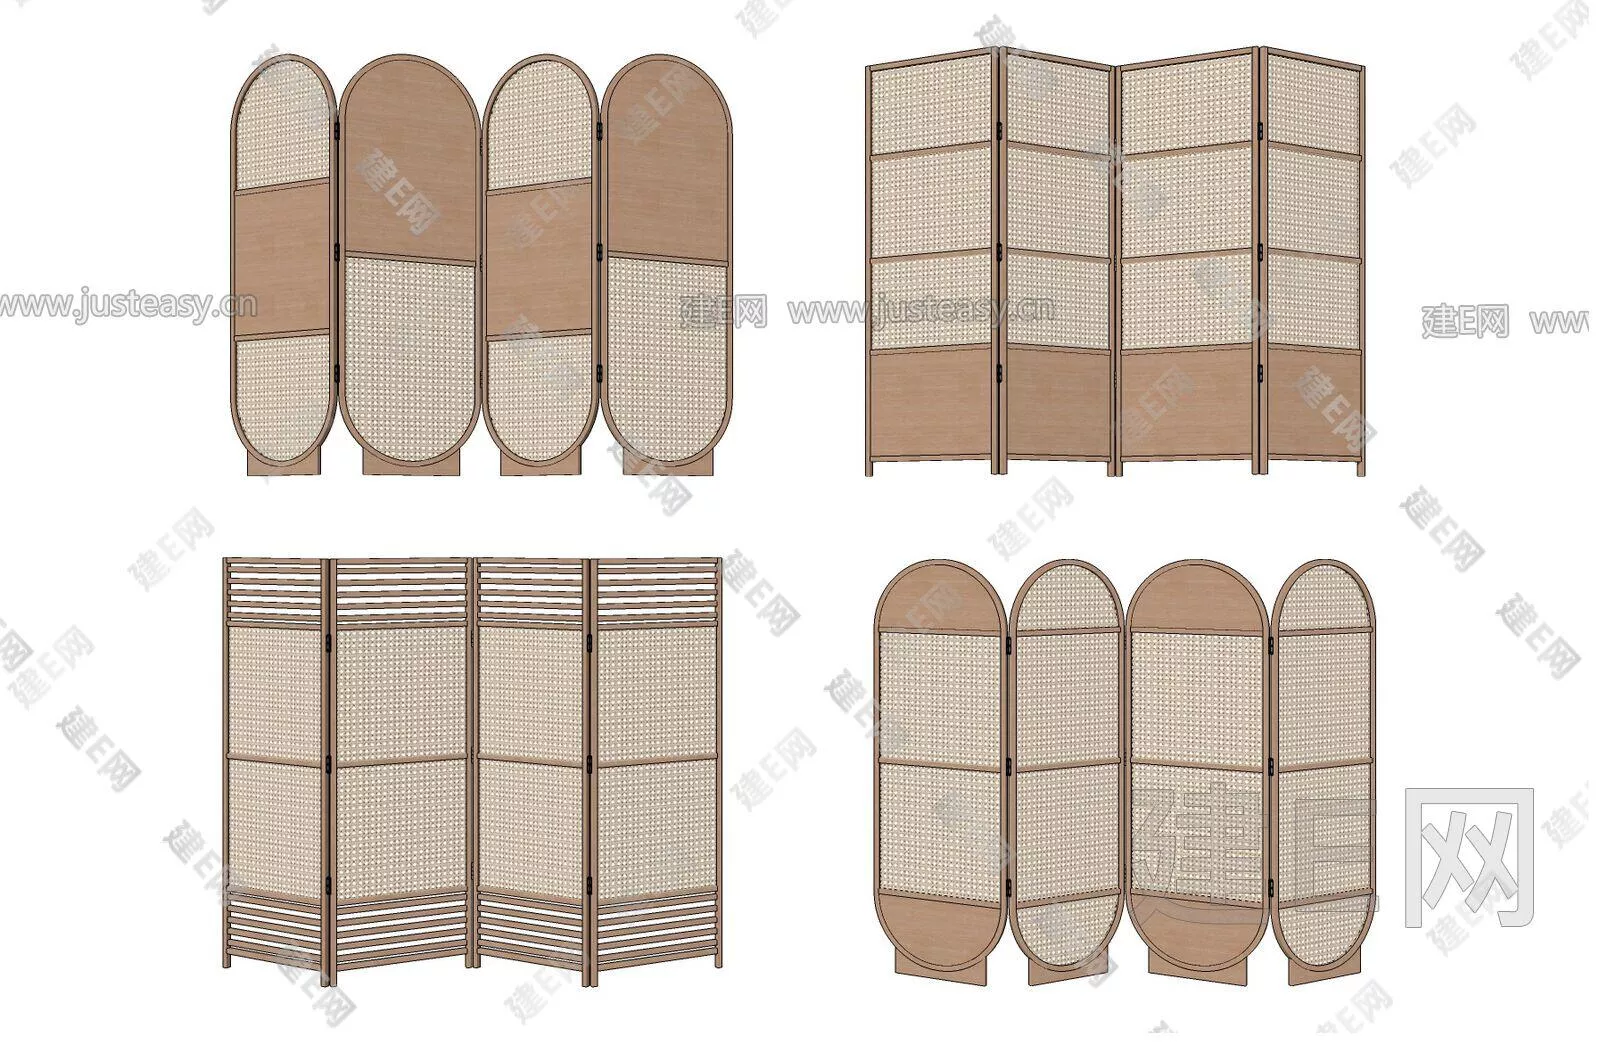 CHINESE PARTITION SCREEN - SKETCHUP 3D MODEL - ENSCAPE - 111035875